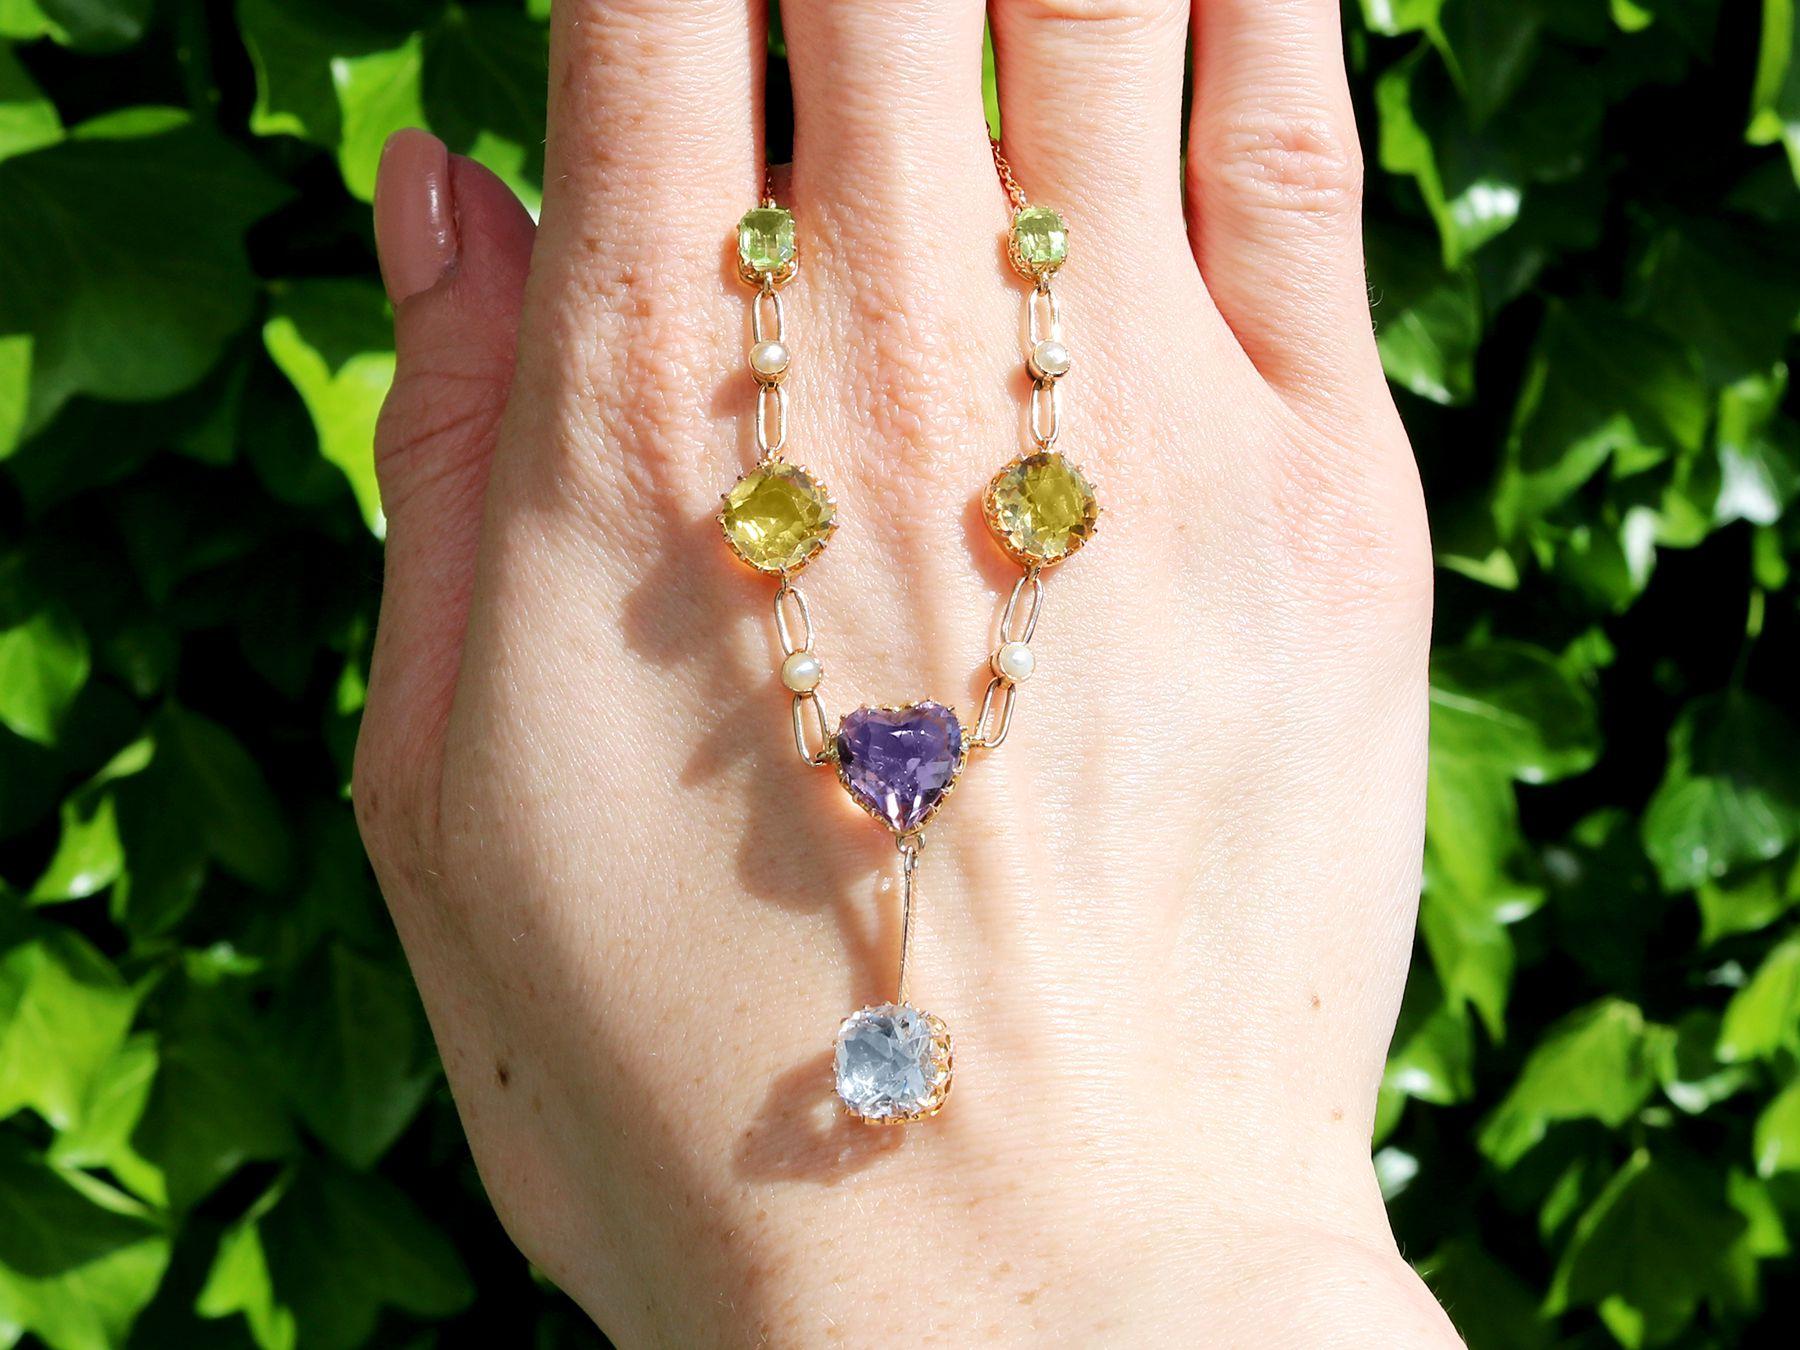 A stunning, fine and impressive 2.36 carat aquamarine, 3.71 carat citrine, 2.10 carat amethyst, 0.80 carat peridot and seed pearl, 12 karat yellow gold necklace; part of our diverse antique jewelry and estate jewelry collections.

This stunning,